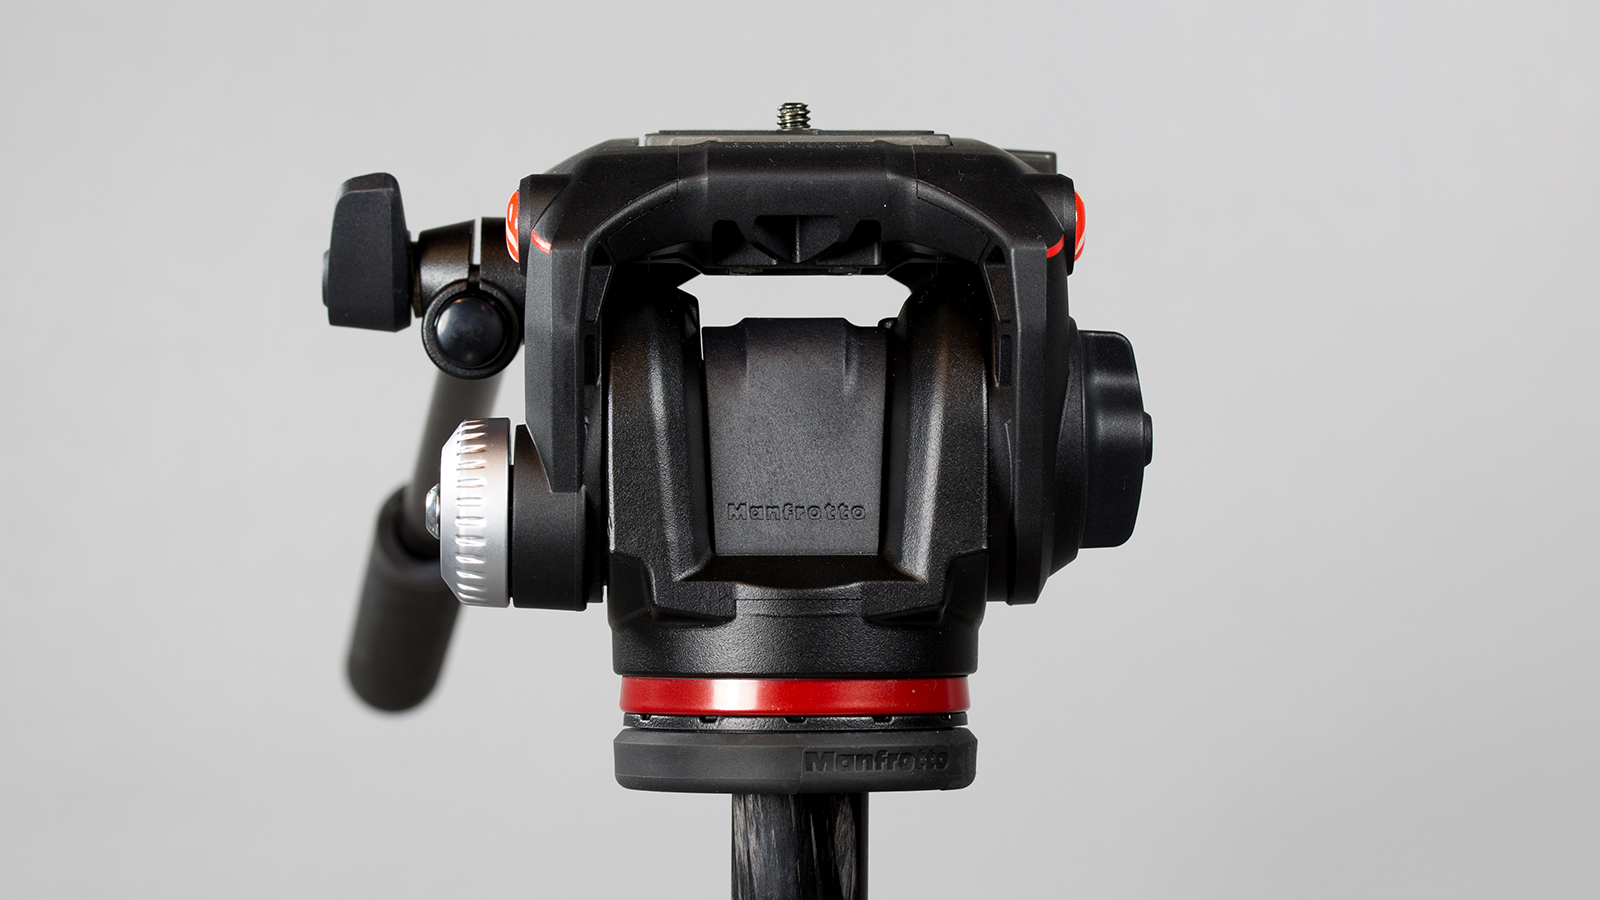 Manfrotto-MHXPRO-2W-DT-012-statiivil